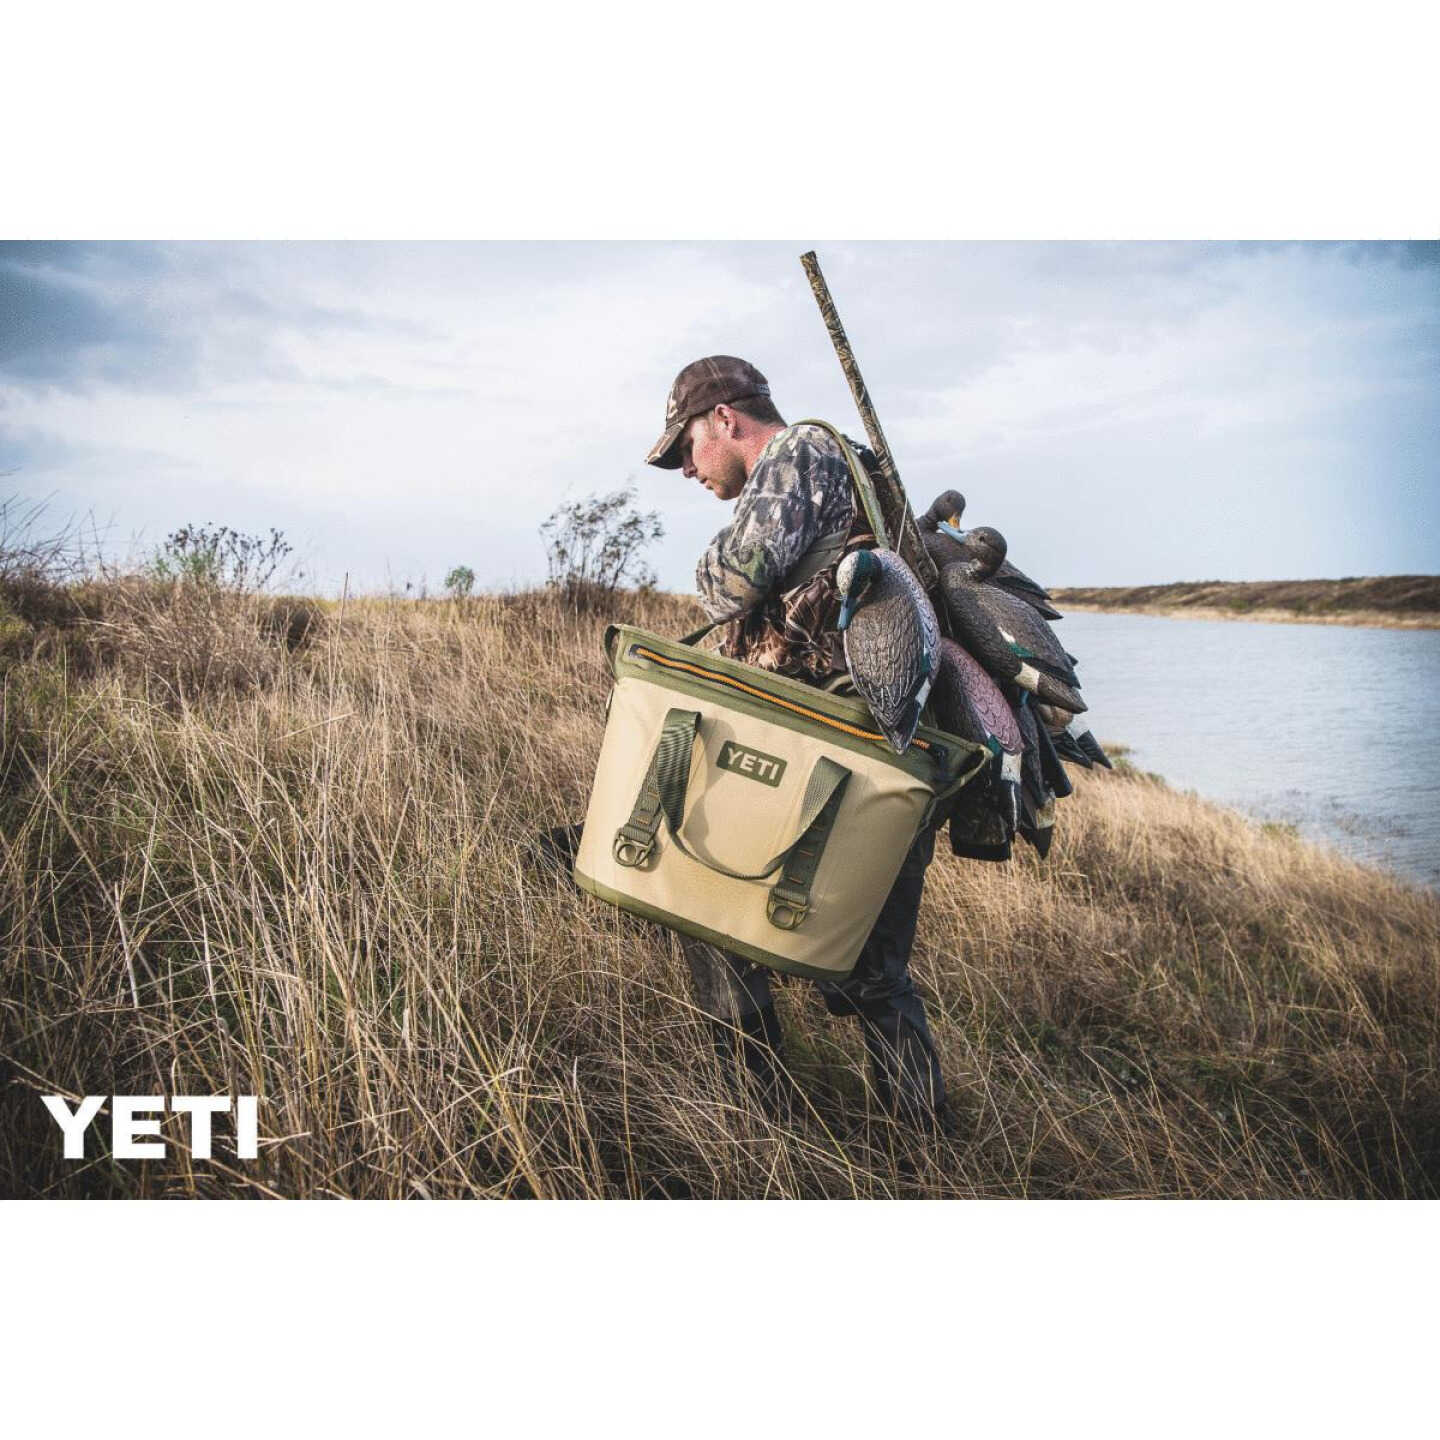 YETI Soft-sided Portable Coolers